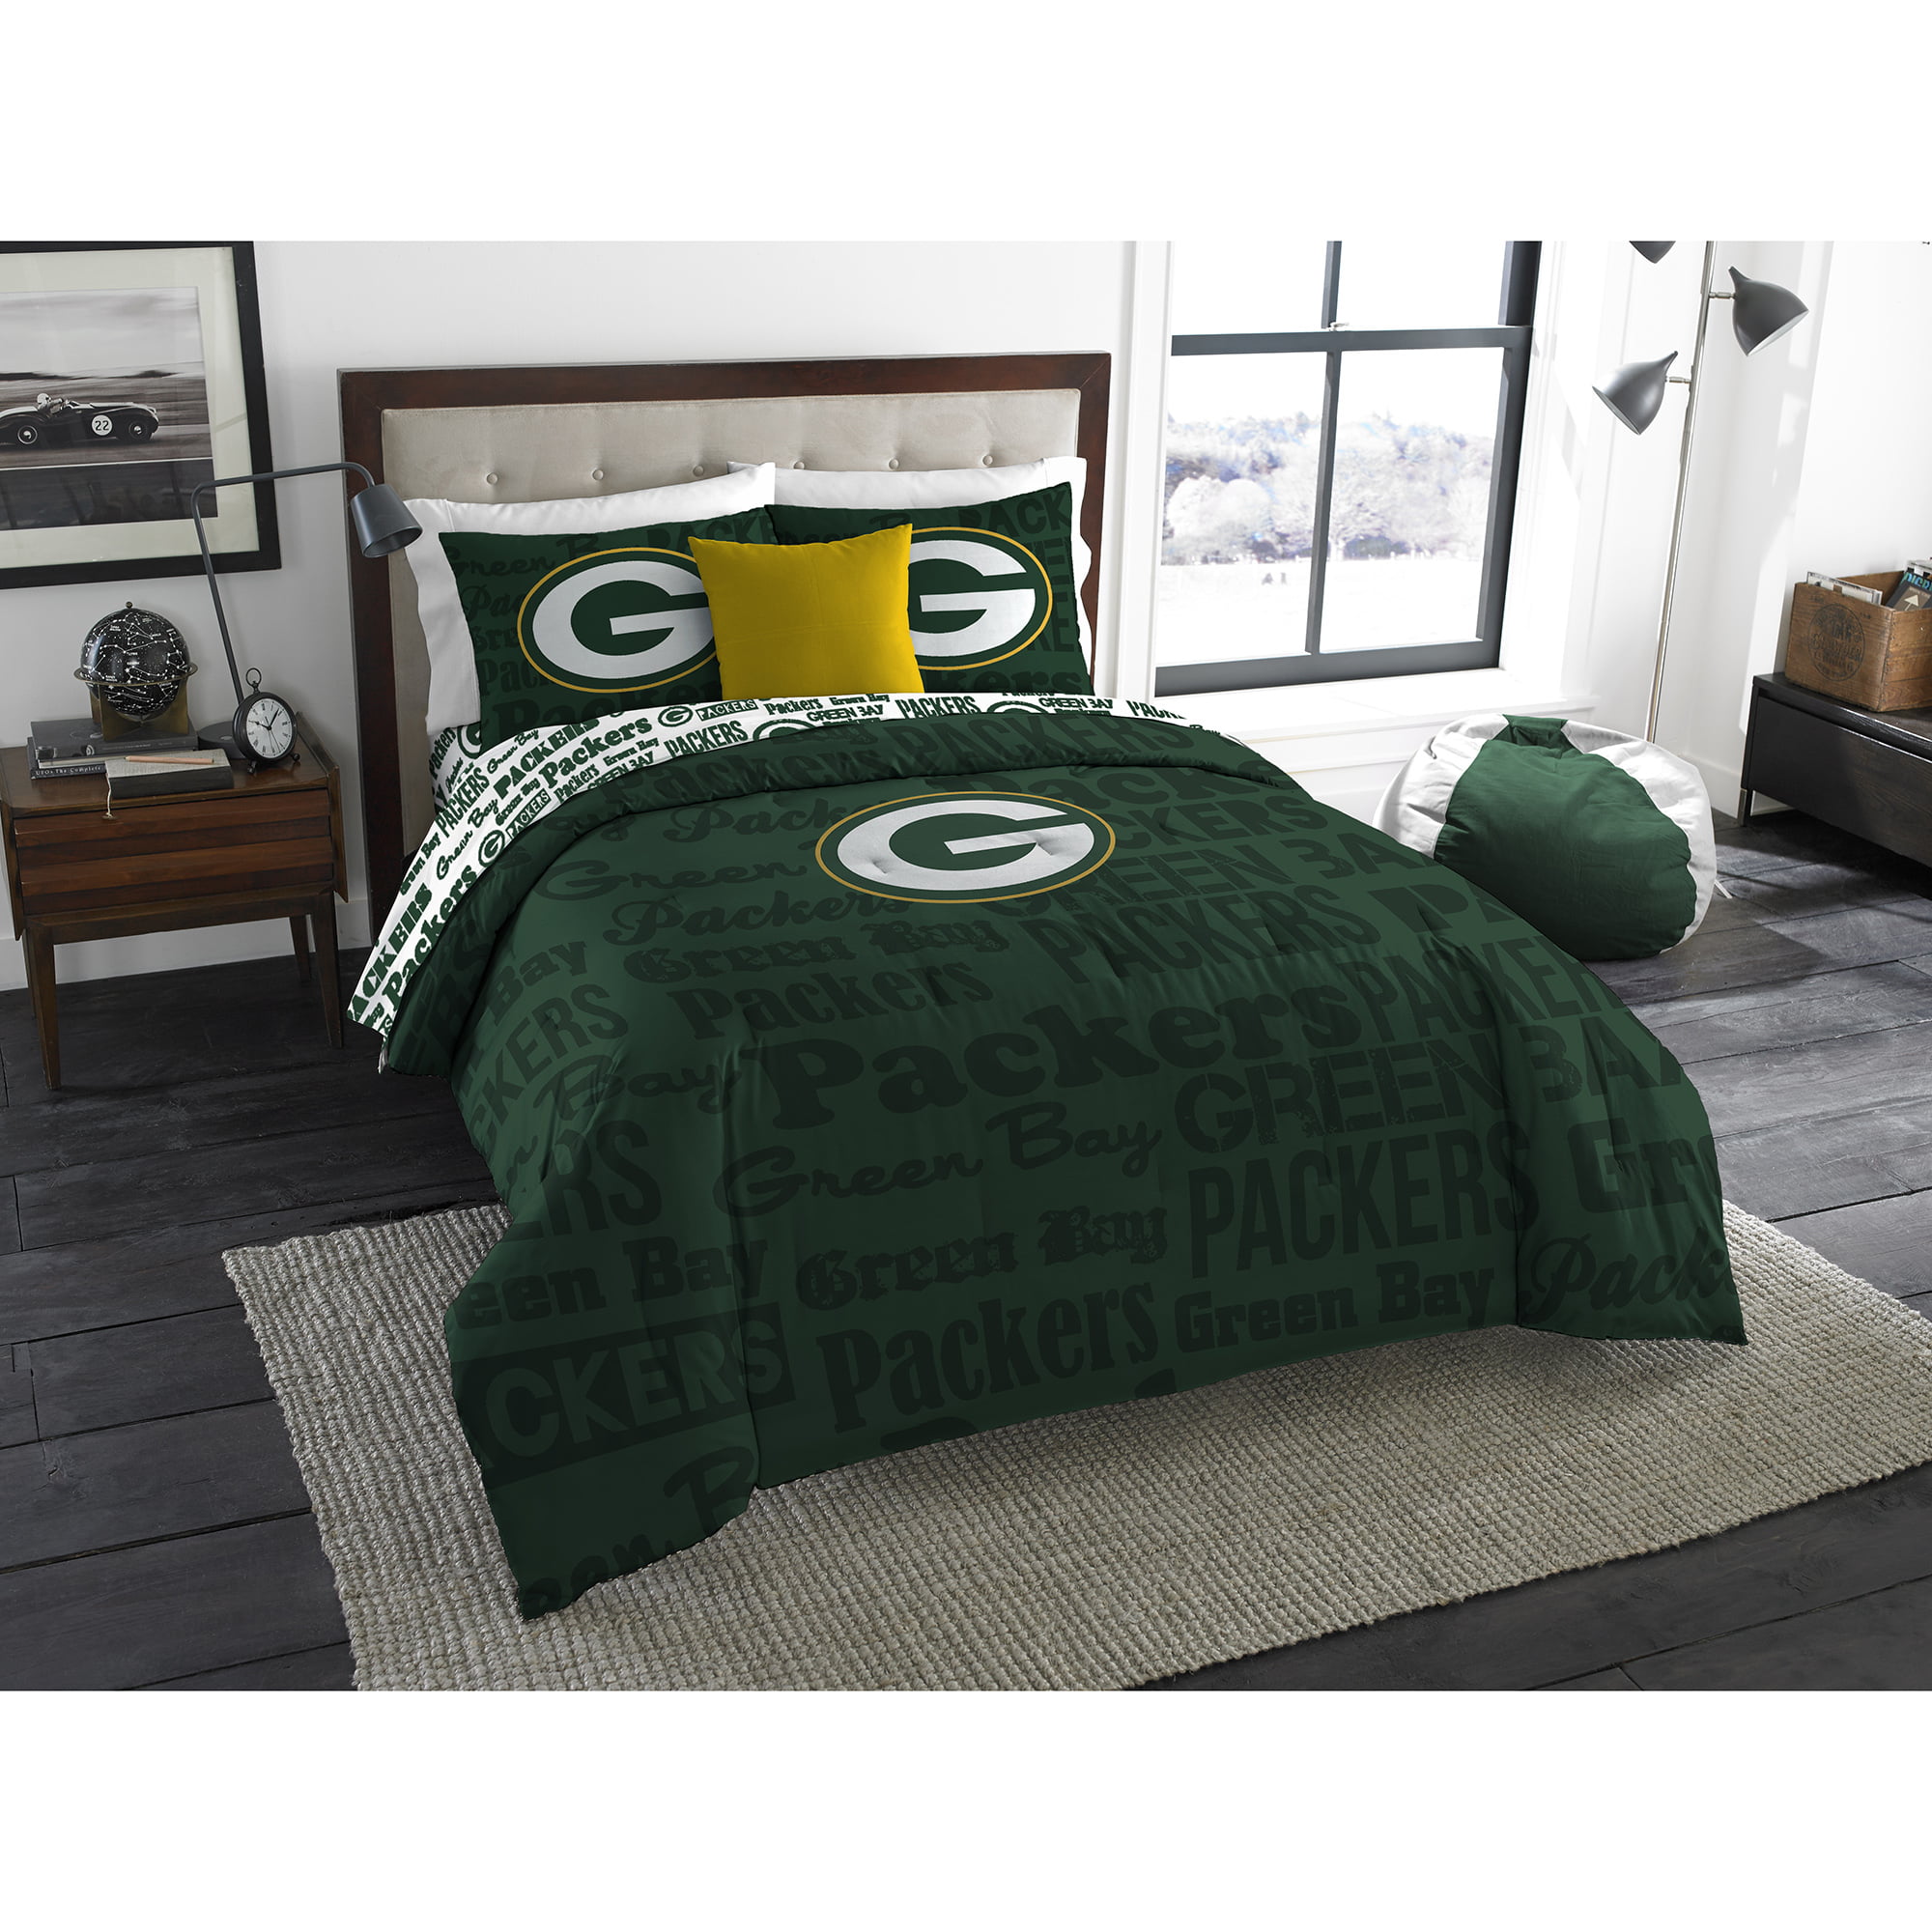 Nfl Green Bay Packers Bed In A Bag, Green Bay Packers Twin Bed Sheets